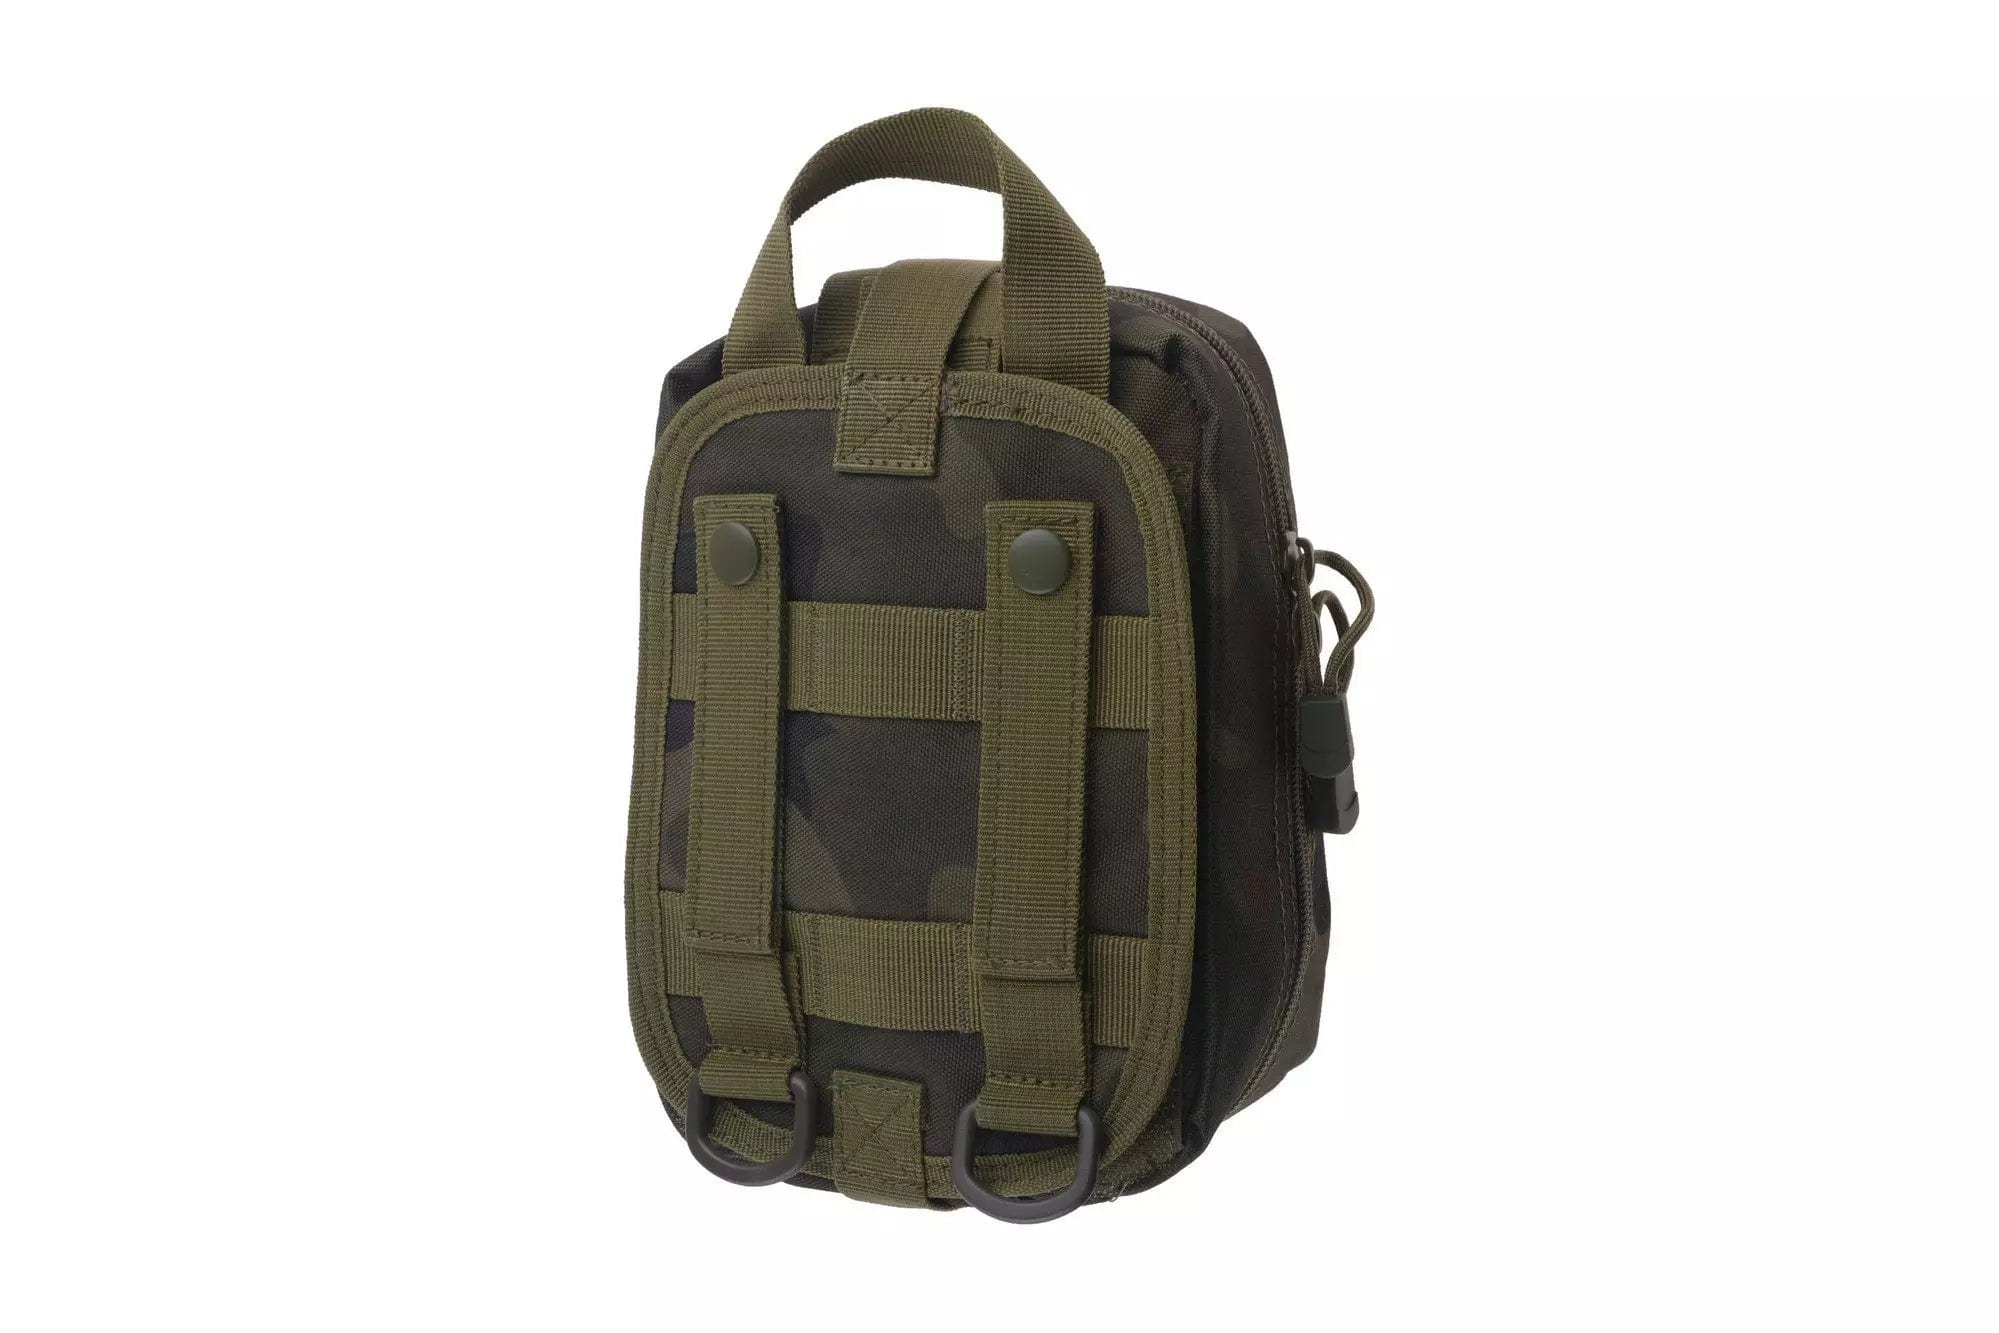 rip-off med kit pouch - wz. 93 woodland panther